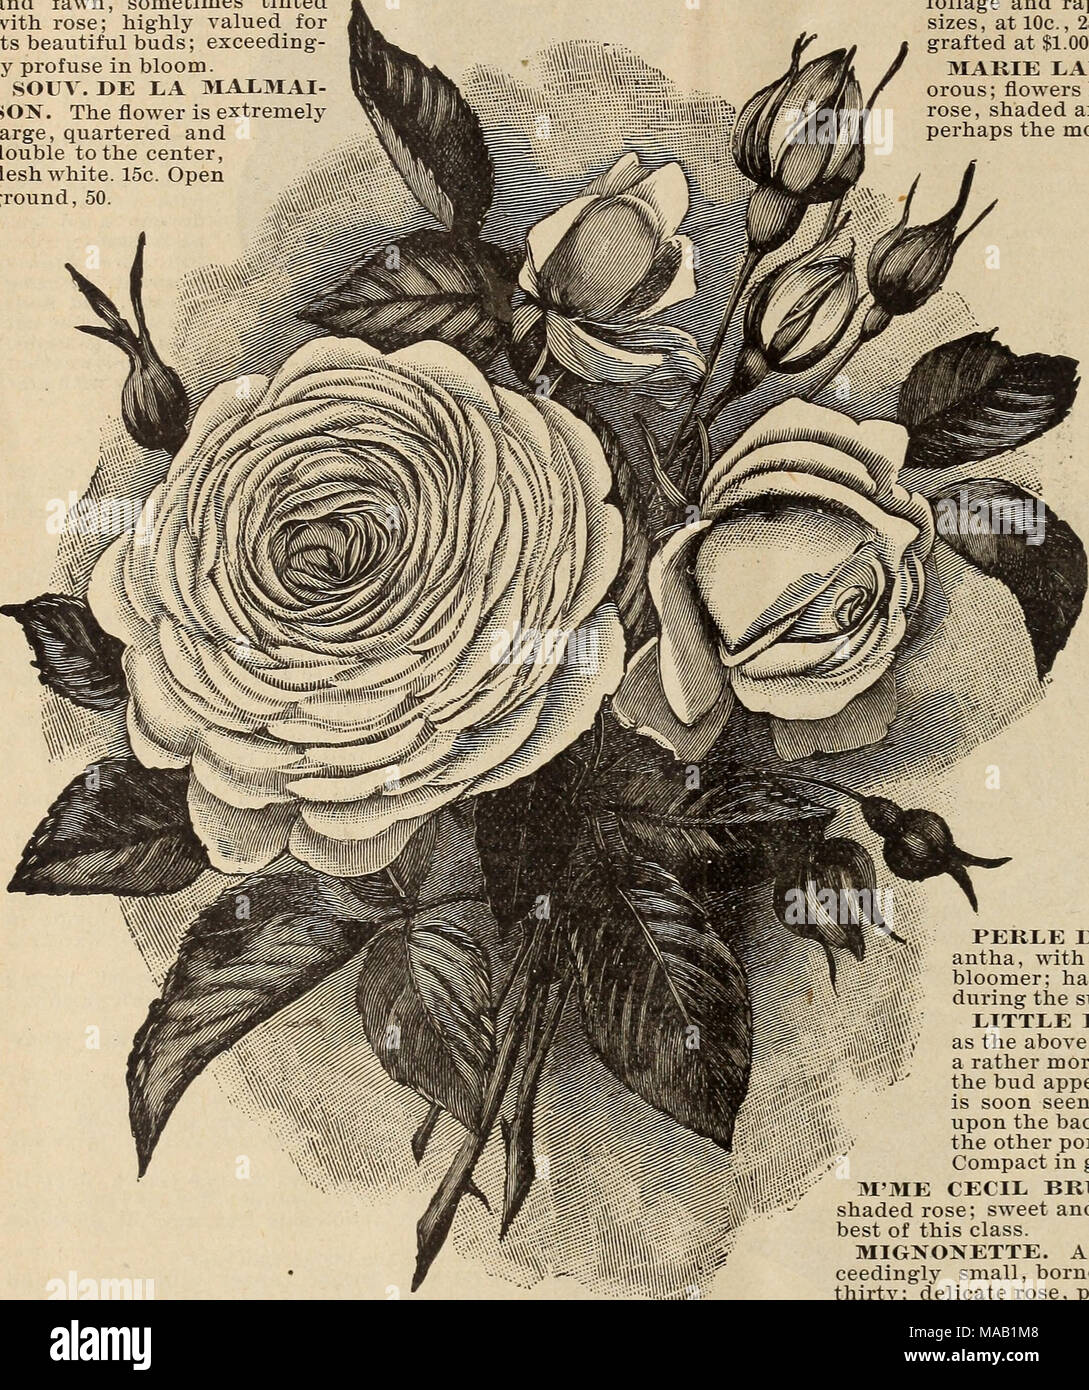 . Drumm Seed and Floral Co. : Fall, 1894-5 . CLOTHILDE SOUPEKT. SOMBREUIL. This magnificent variety has immense finely formed flowers of a beautiful white, tinged with a deli- cate rose. It is a rich and imposing flower, and has the ad- vantage also of most beautiful foliage, itself very fragrant; especially fine in the fall. SUNSET. A sport from Perle des Jardins, which it closely resembles, except in color; the color is a remarkable shade of rich golden amber, elegantly tinged and shaded with dark, ruddy copper, intensely beautiful; with us has not proved as vigorous a grower as its parent.  Stock Photo